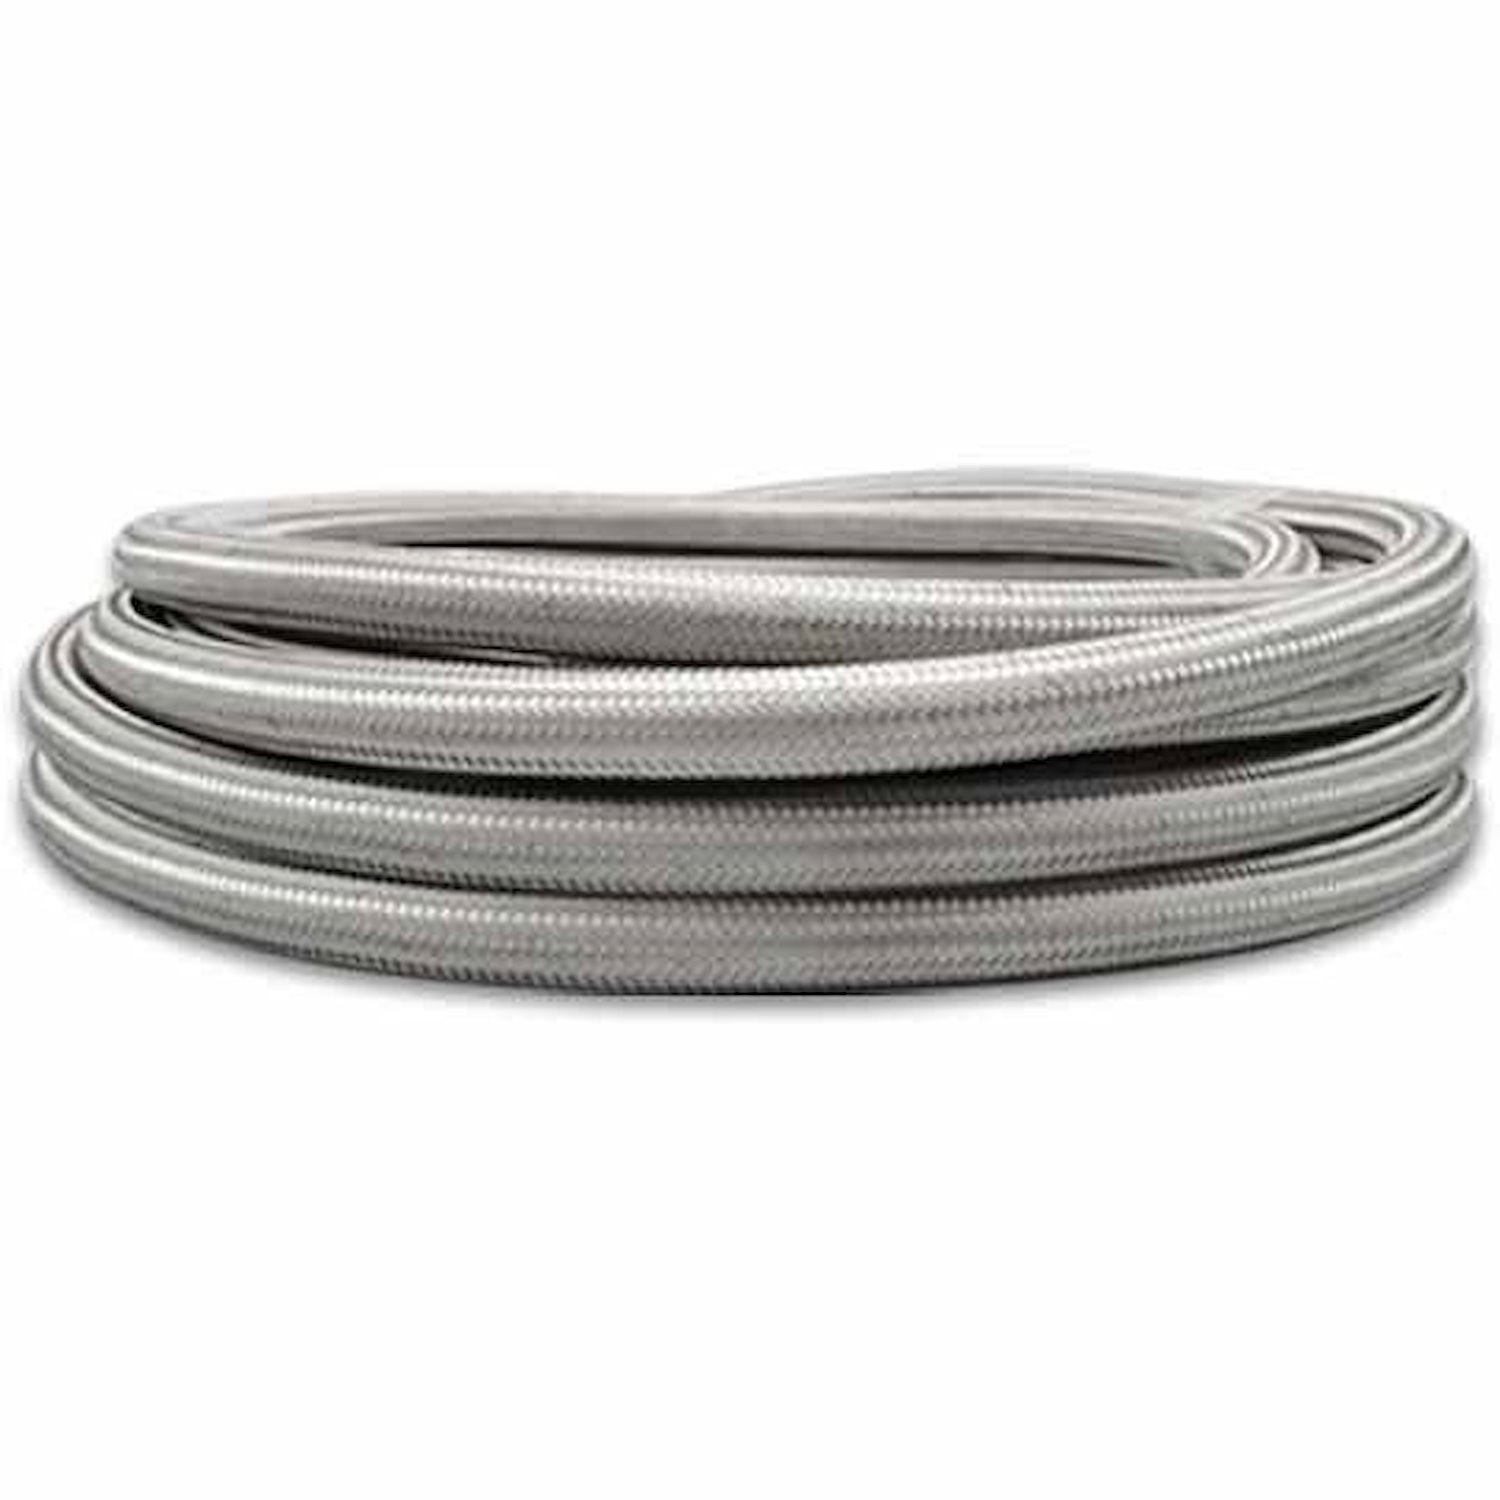 PTFE Lined Stainless Steel Braided Flex Hose